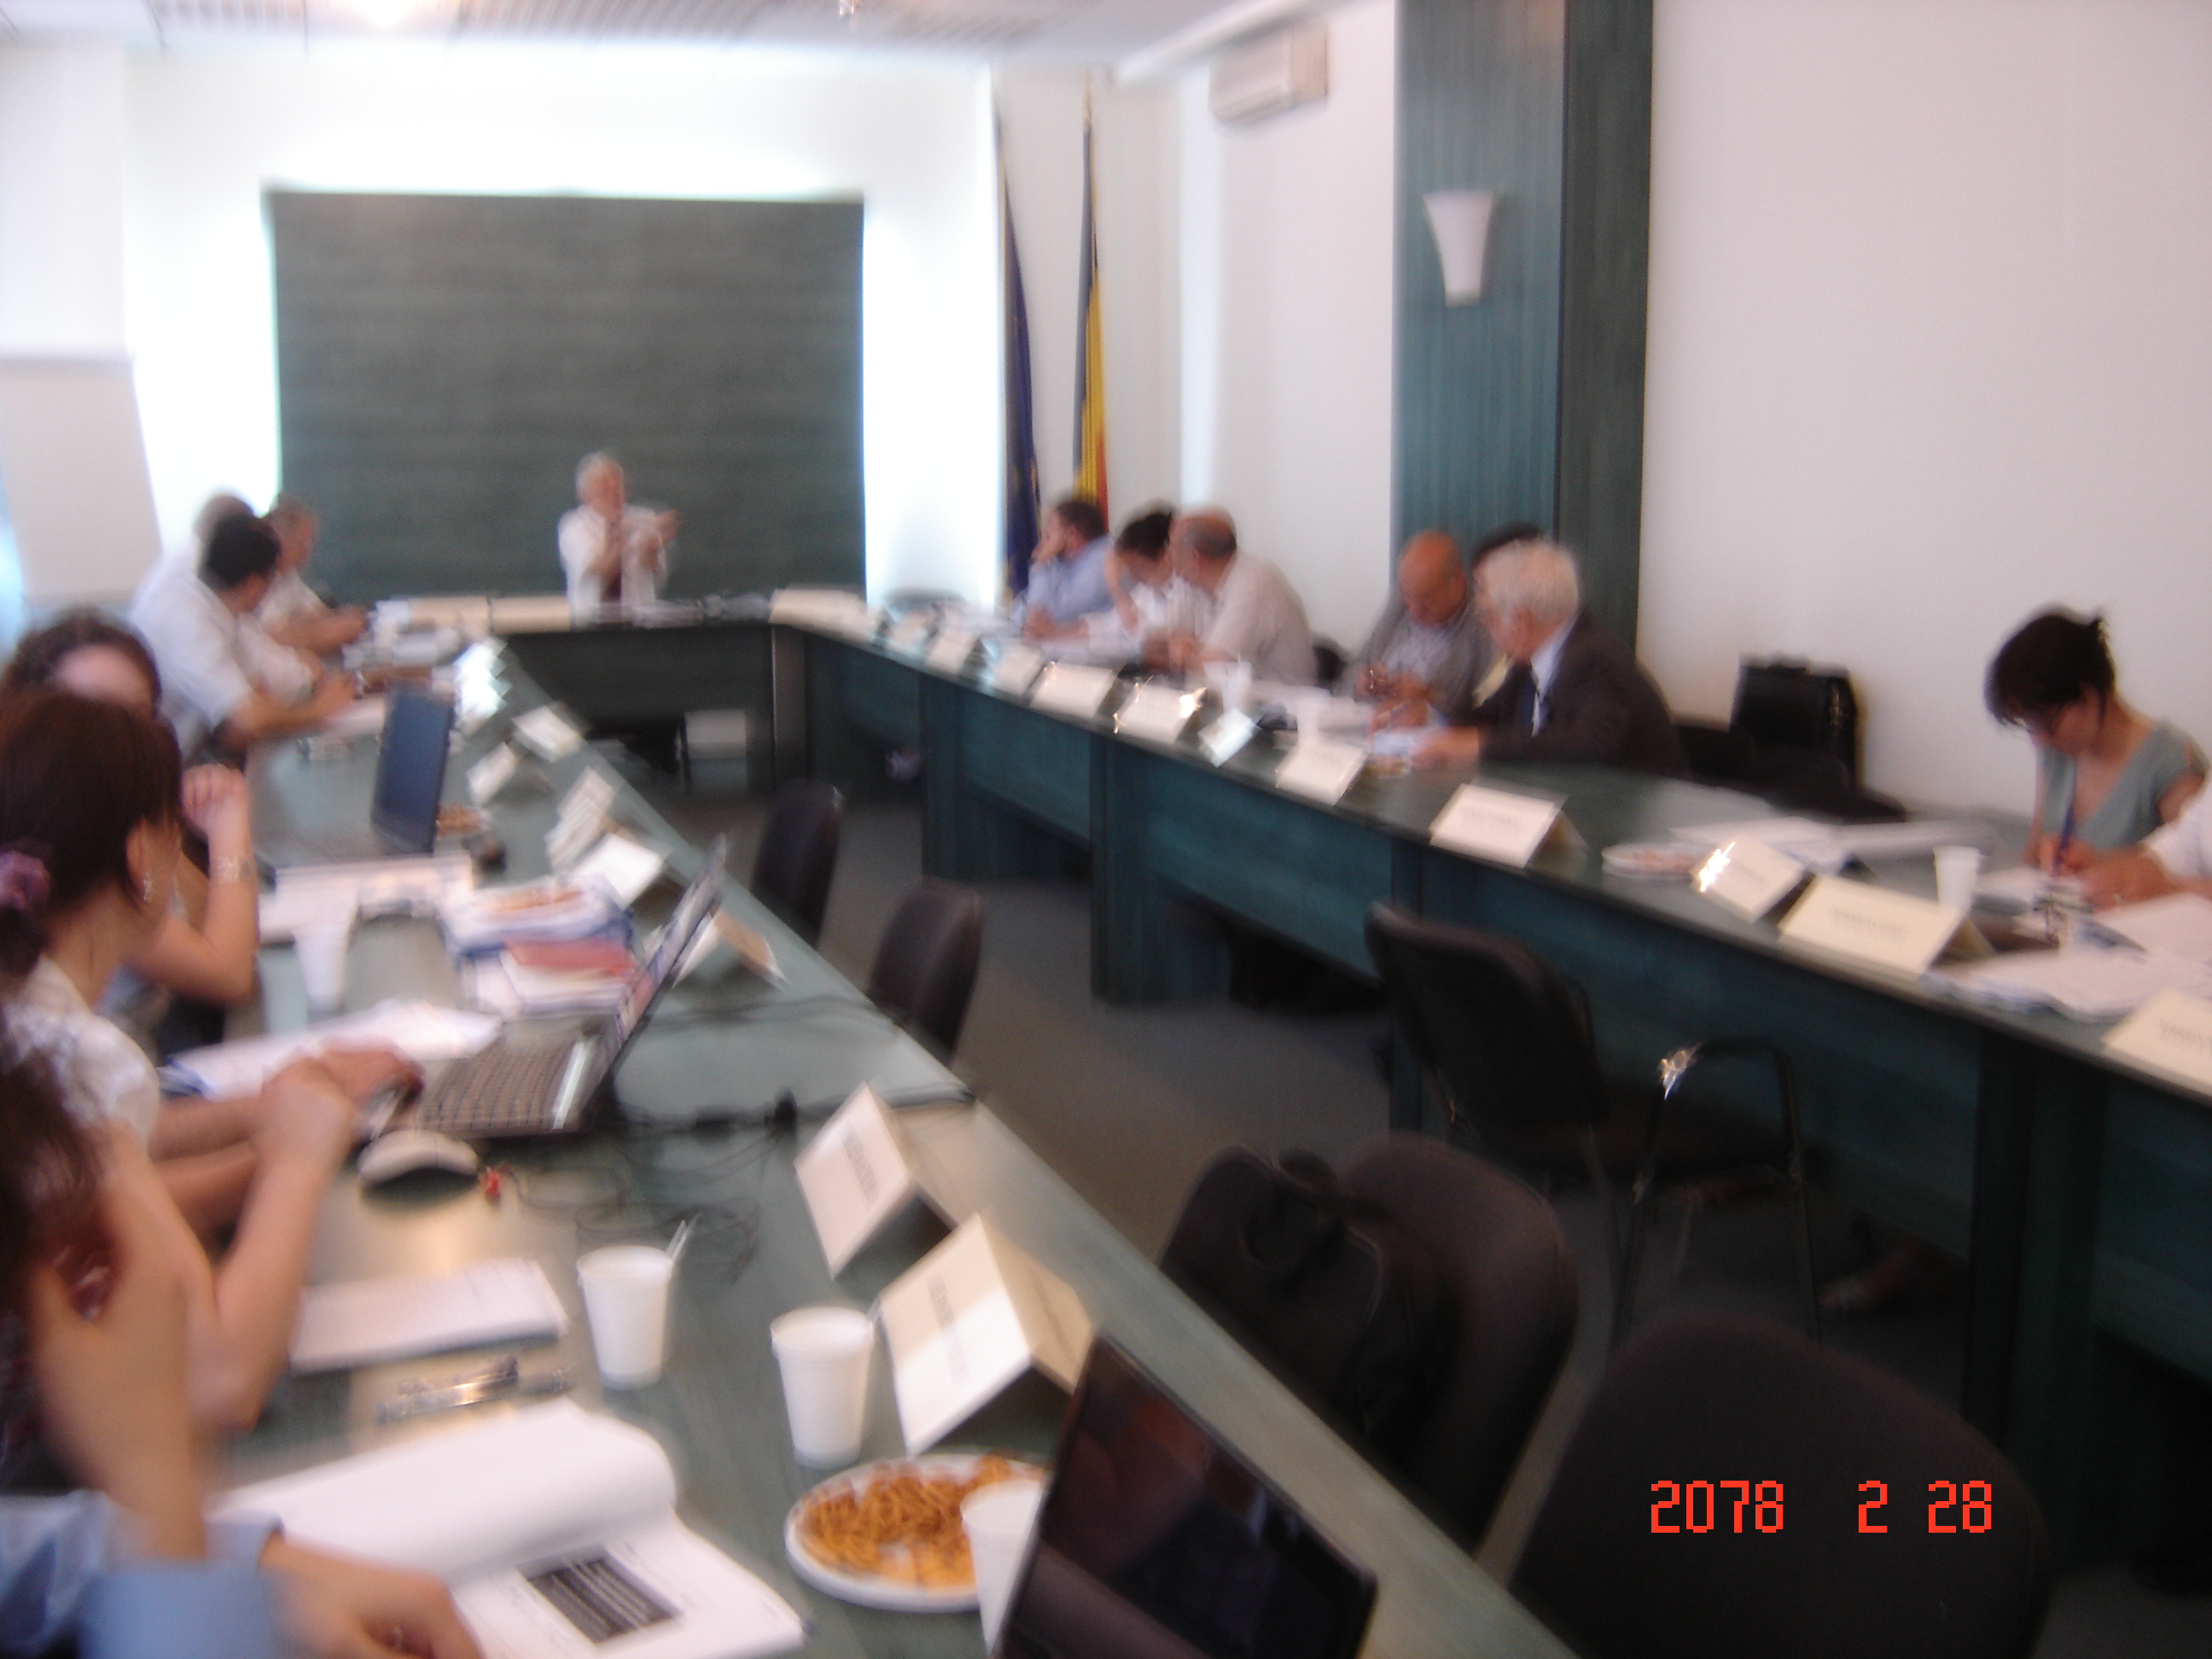 The meeting of the Project Coordination Committee